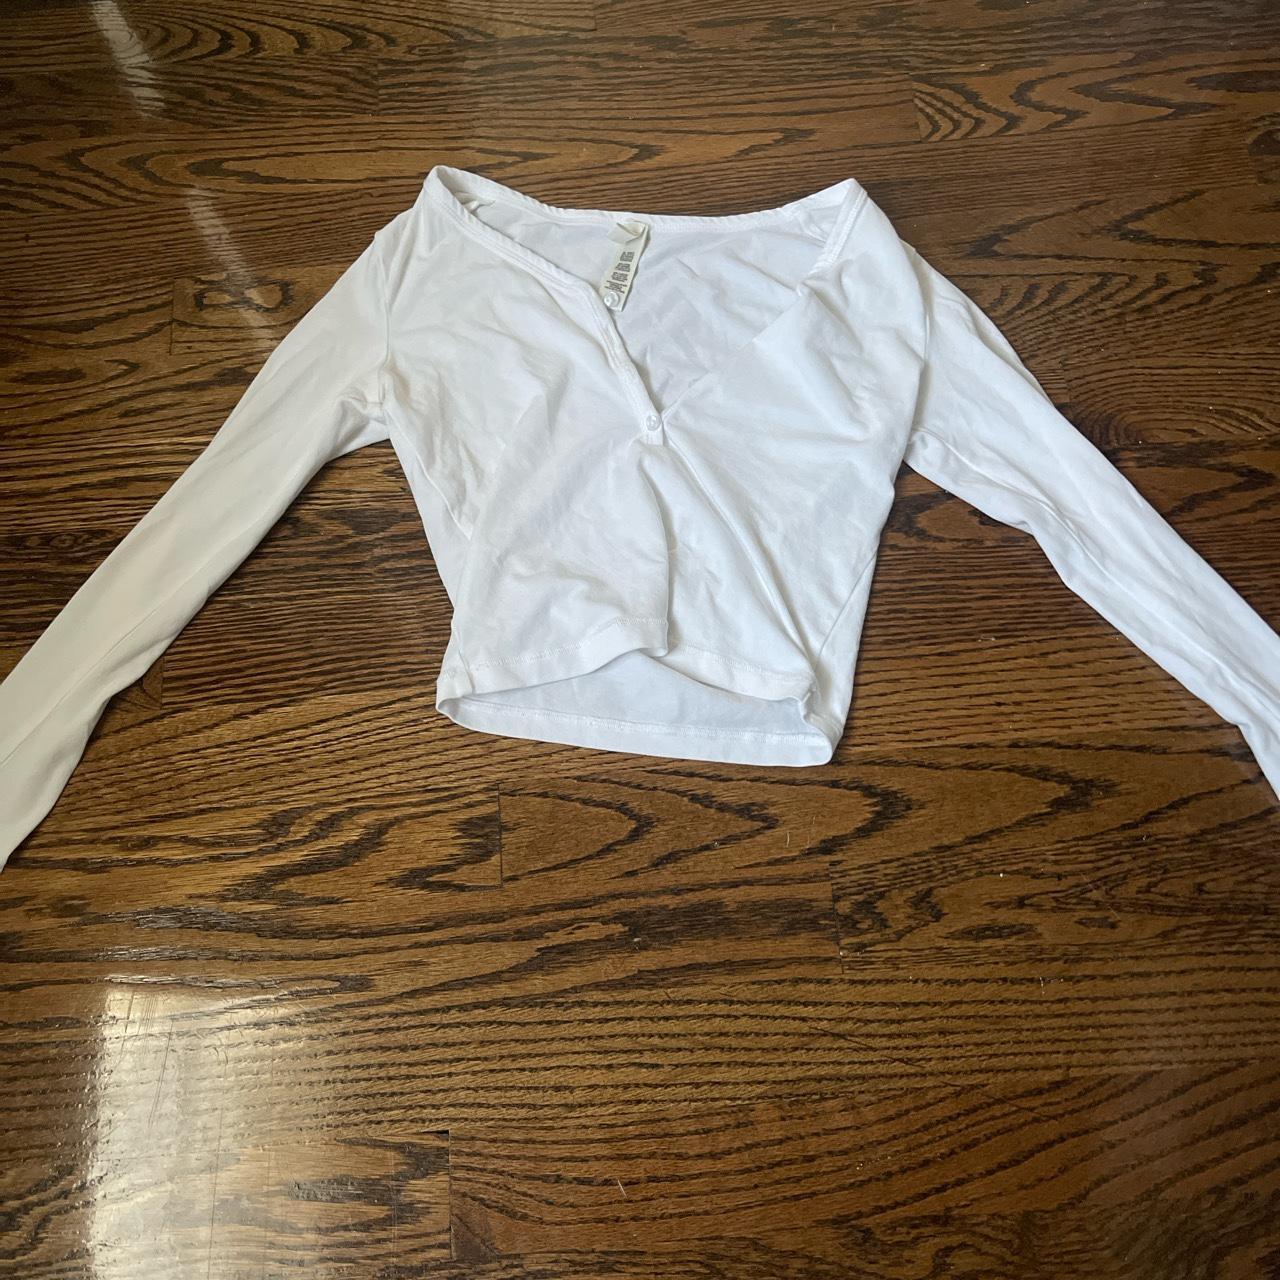 Limited edition skims white long sleeve. This is my... - Depop